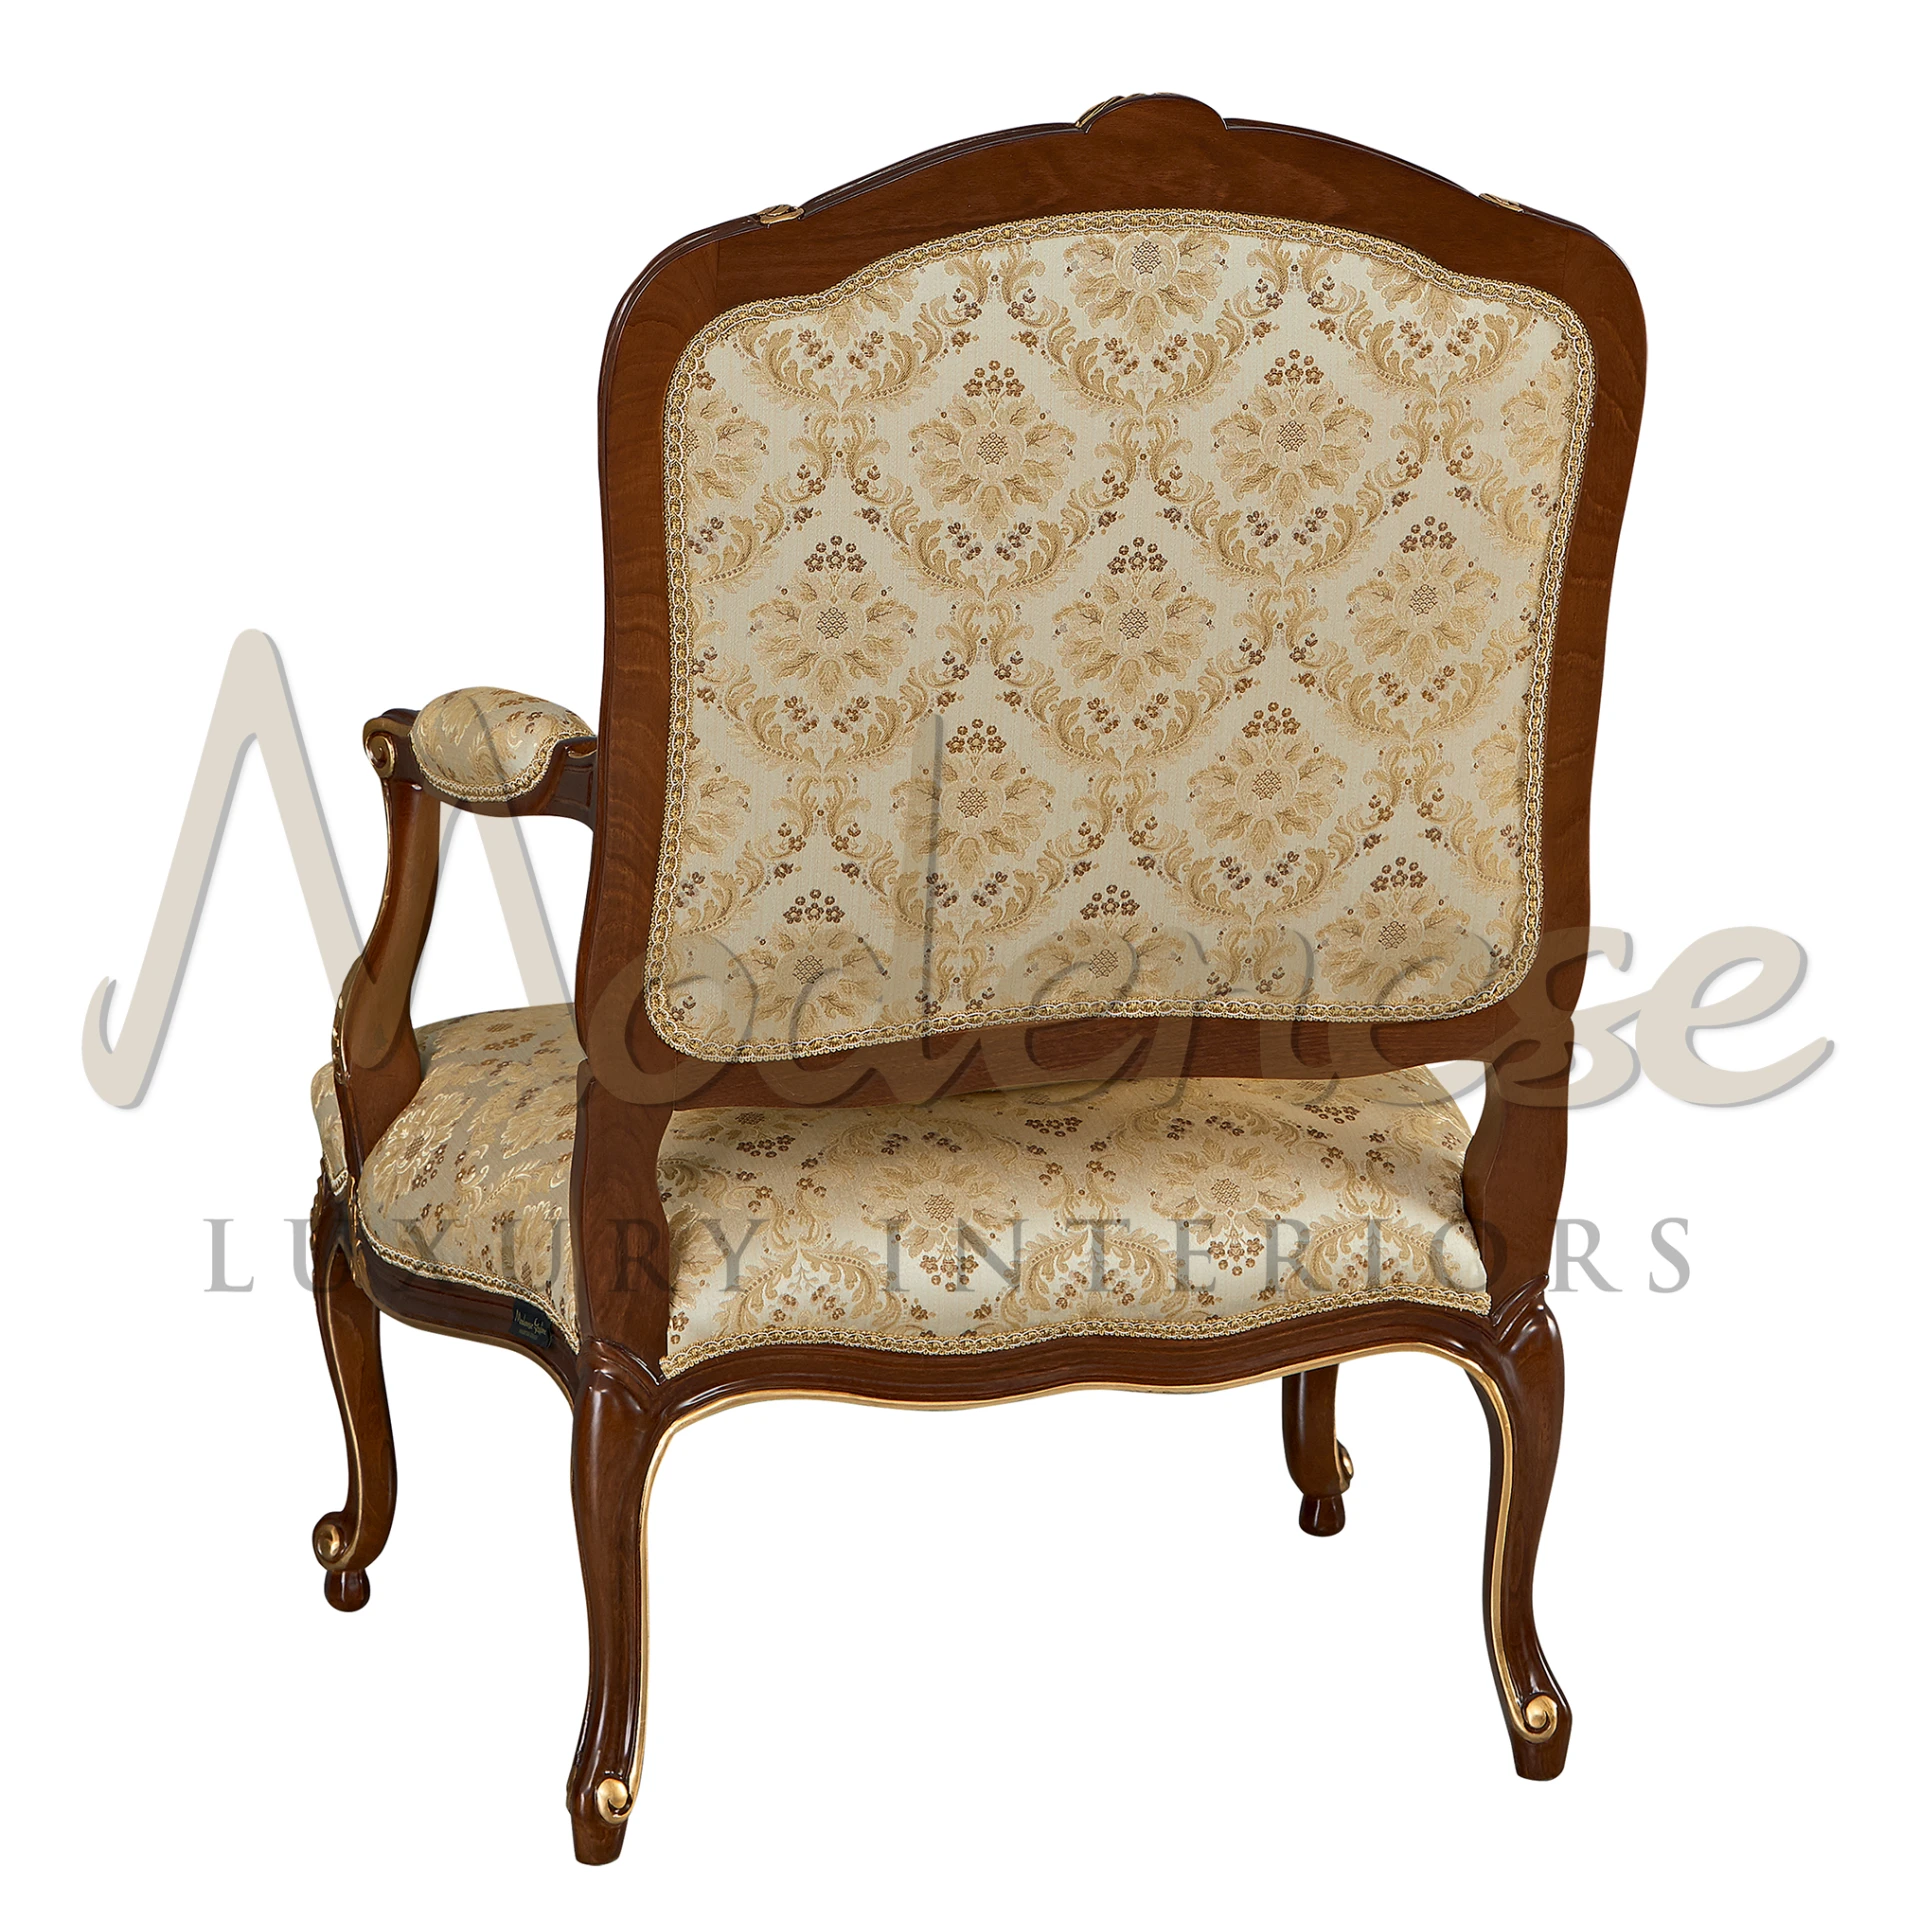 Neutral Beige Classic Armchair, ideal for any decor, showcasing Modenese craftsmanship with gold leaf carving and pattern fabric.
